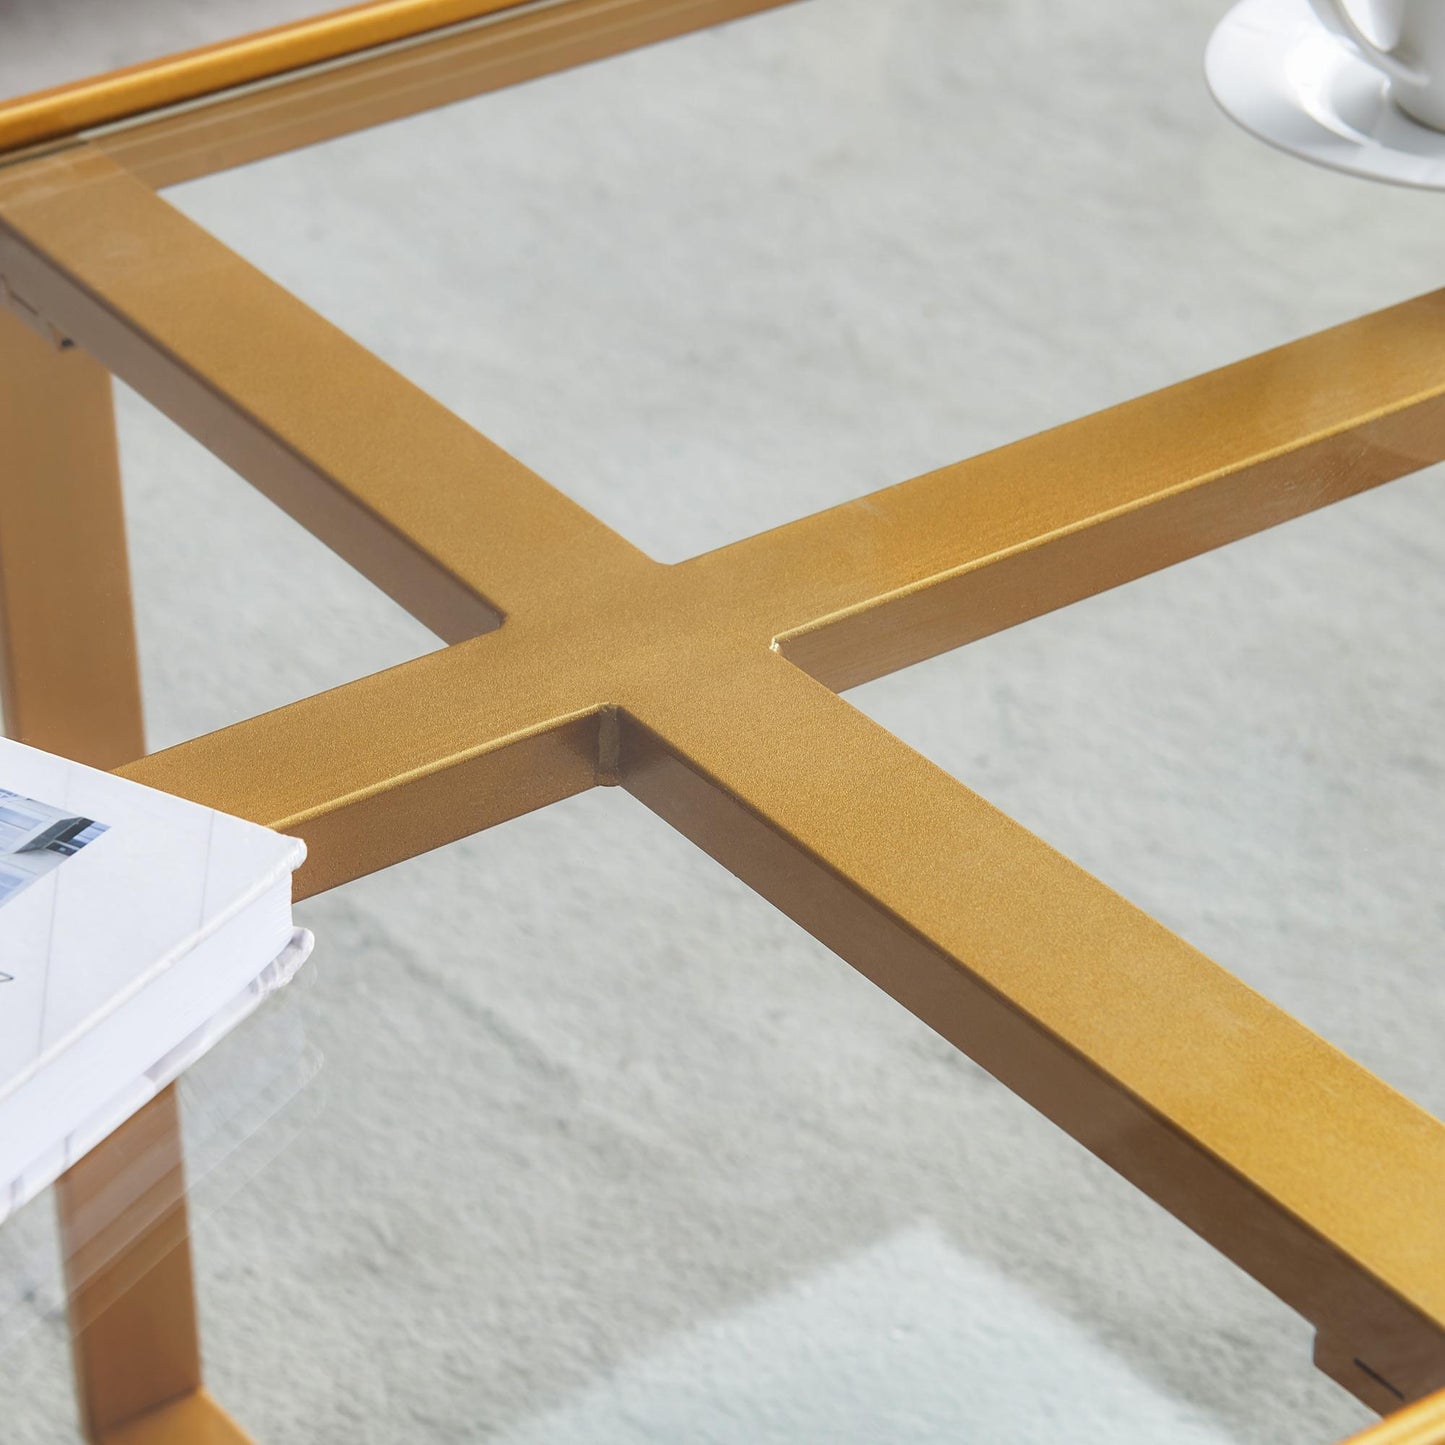 Minimalism rectangle coffee table,Golden metal frame with tempered glass tabletop